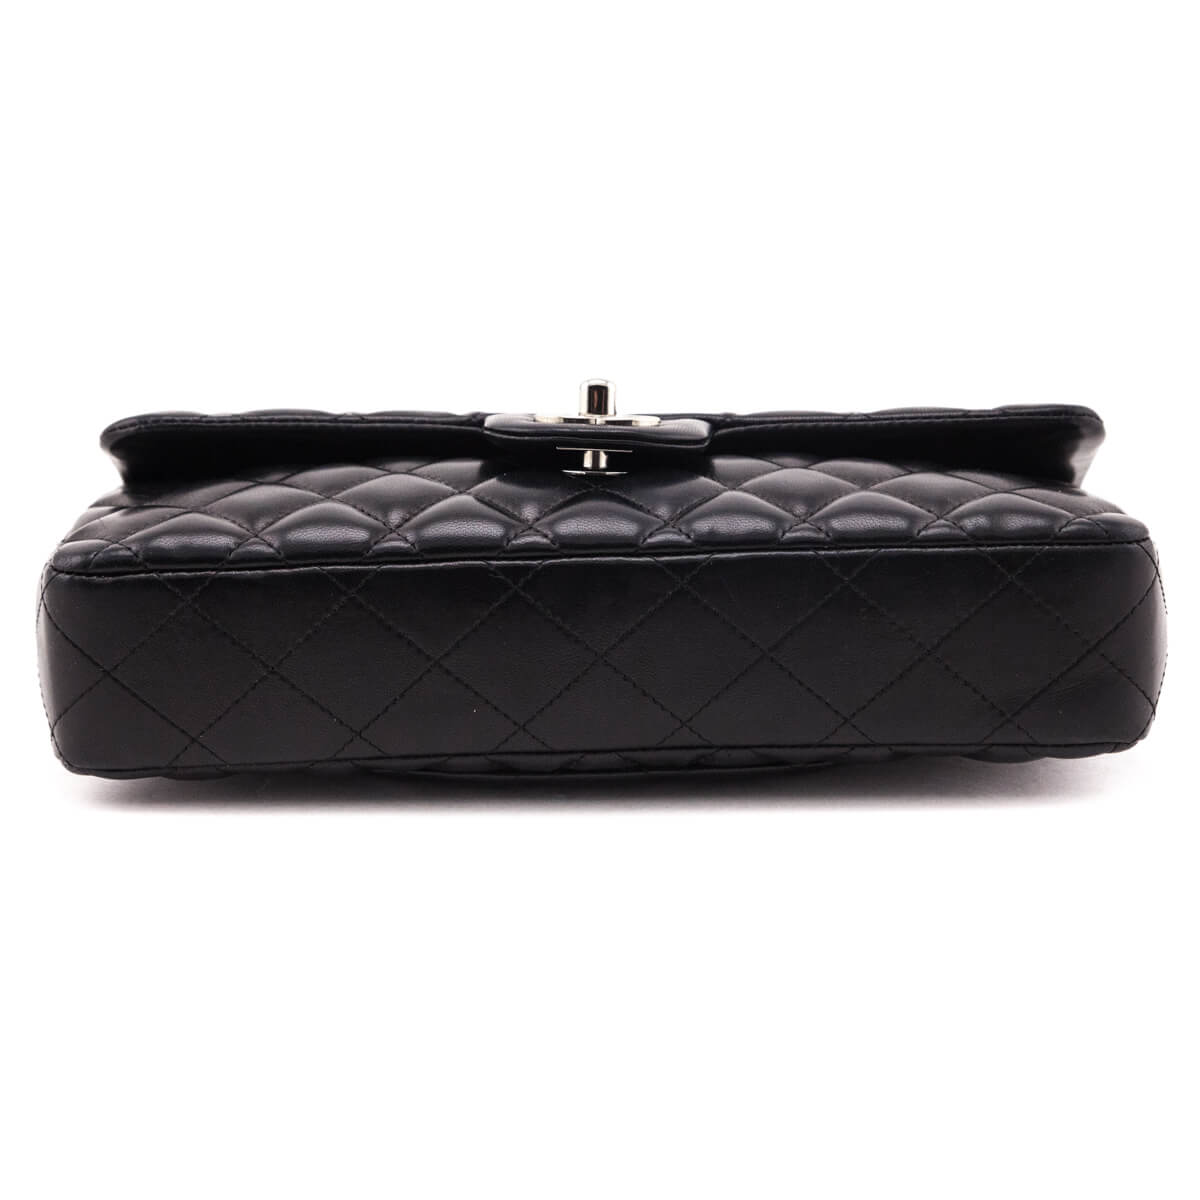 Chanel Black Quilted Lambskin E/W Flap Bag - Love that Bag etc - Preowned Authentic Designer Handbags & Preloved Fashions